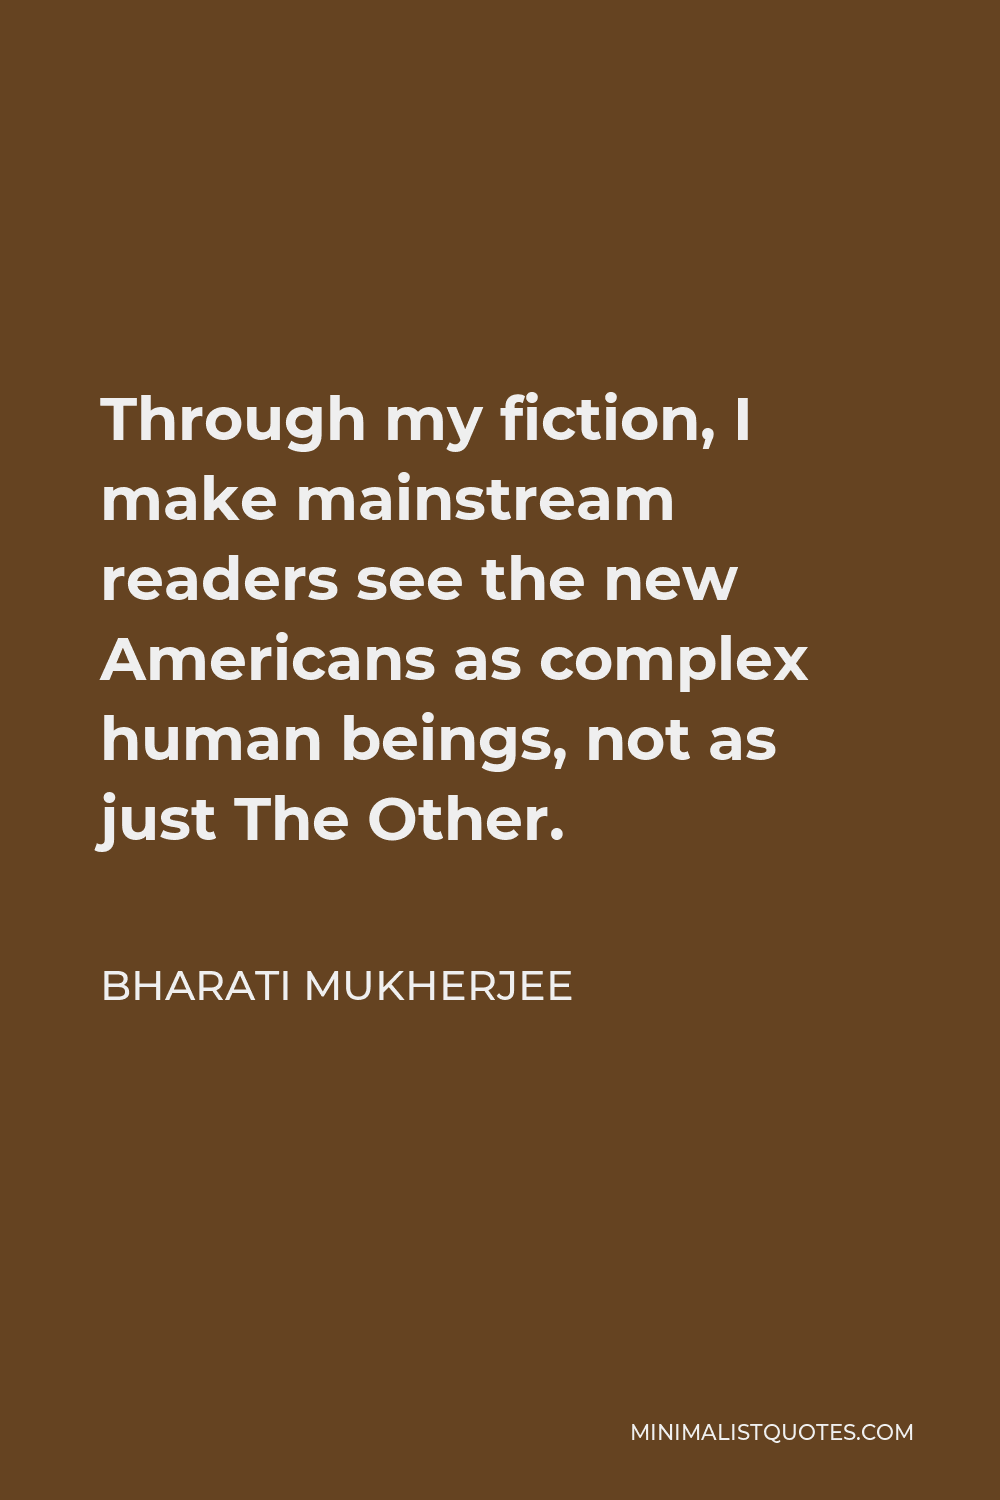 Bharati Mukherjee Quote - Through my fiction, I make mainstream readers see the new Americans as complex human beings, not as just The Other.